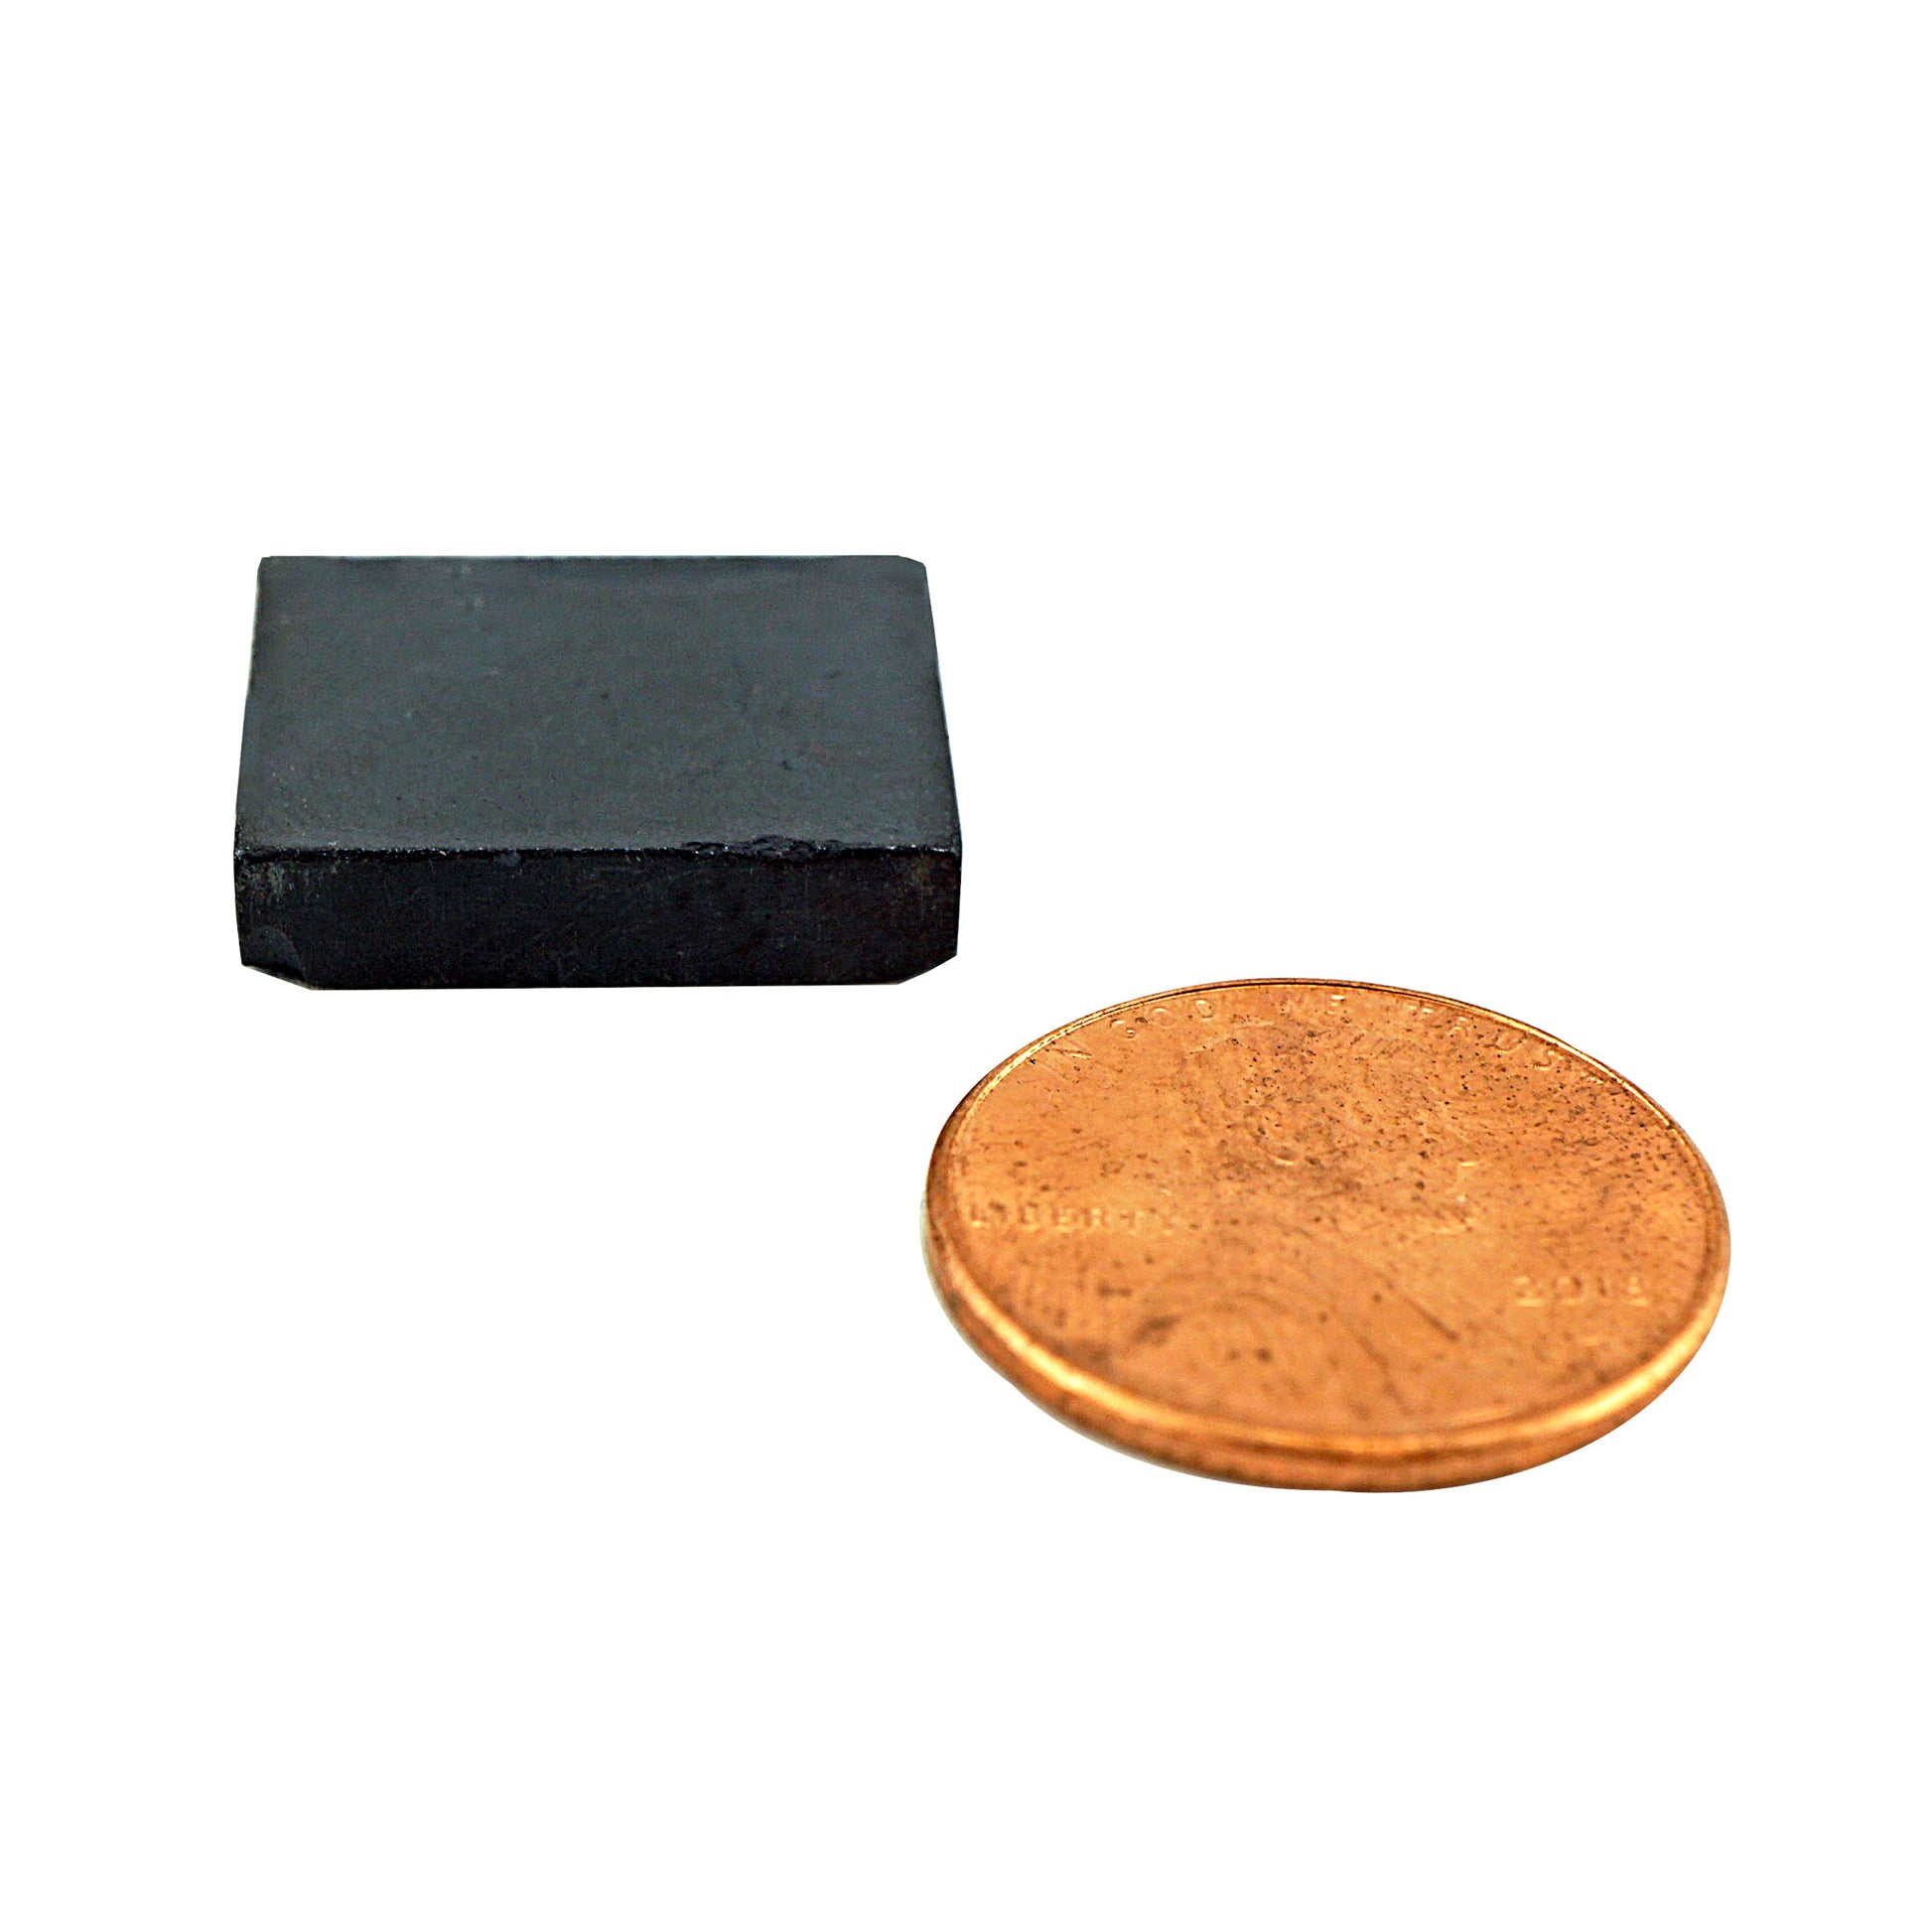 Load image into Gallery viewer, CB001503-S Ceramic Block Magnet - Compared to Penny for Size Reference